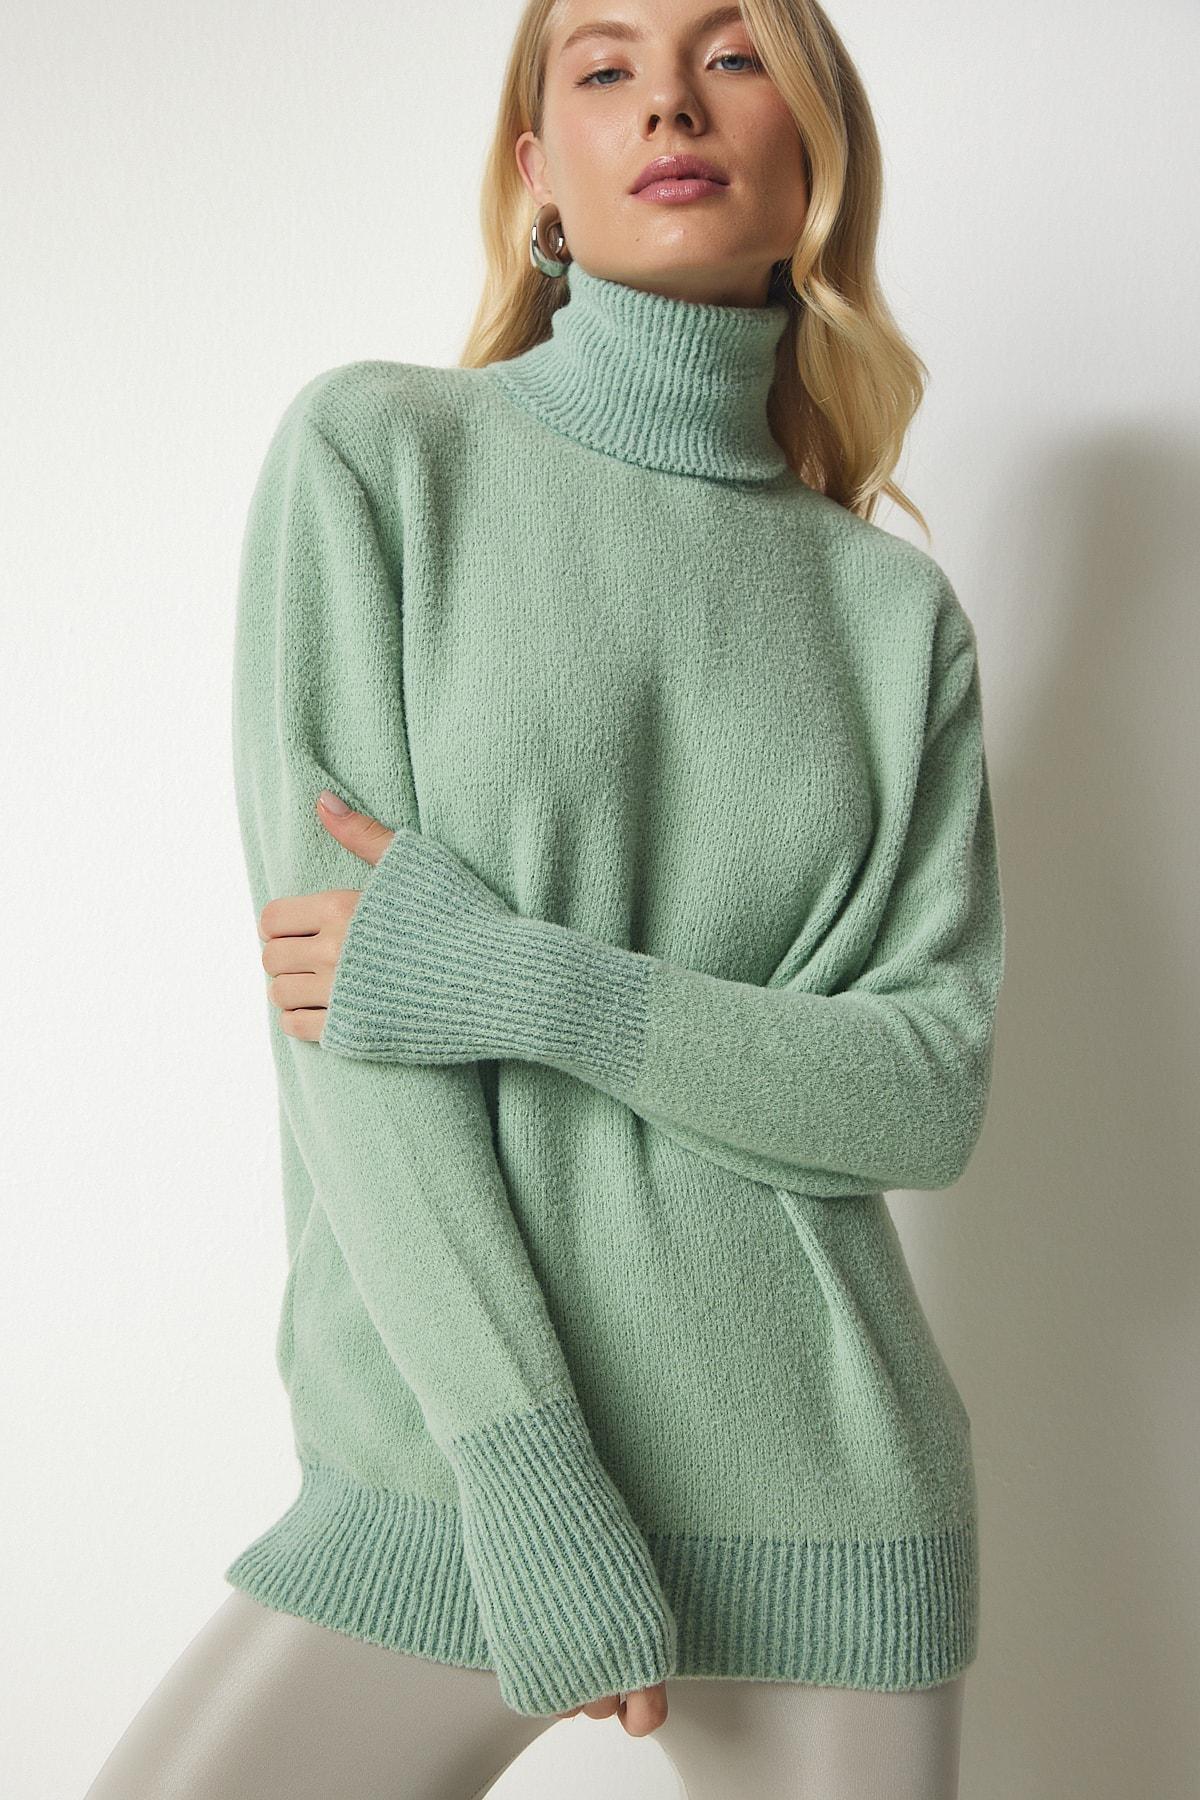 Happiness Istanbul - Green Turtleneck Soft Textured Knitwear Sweater